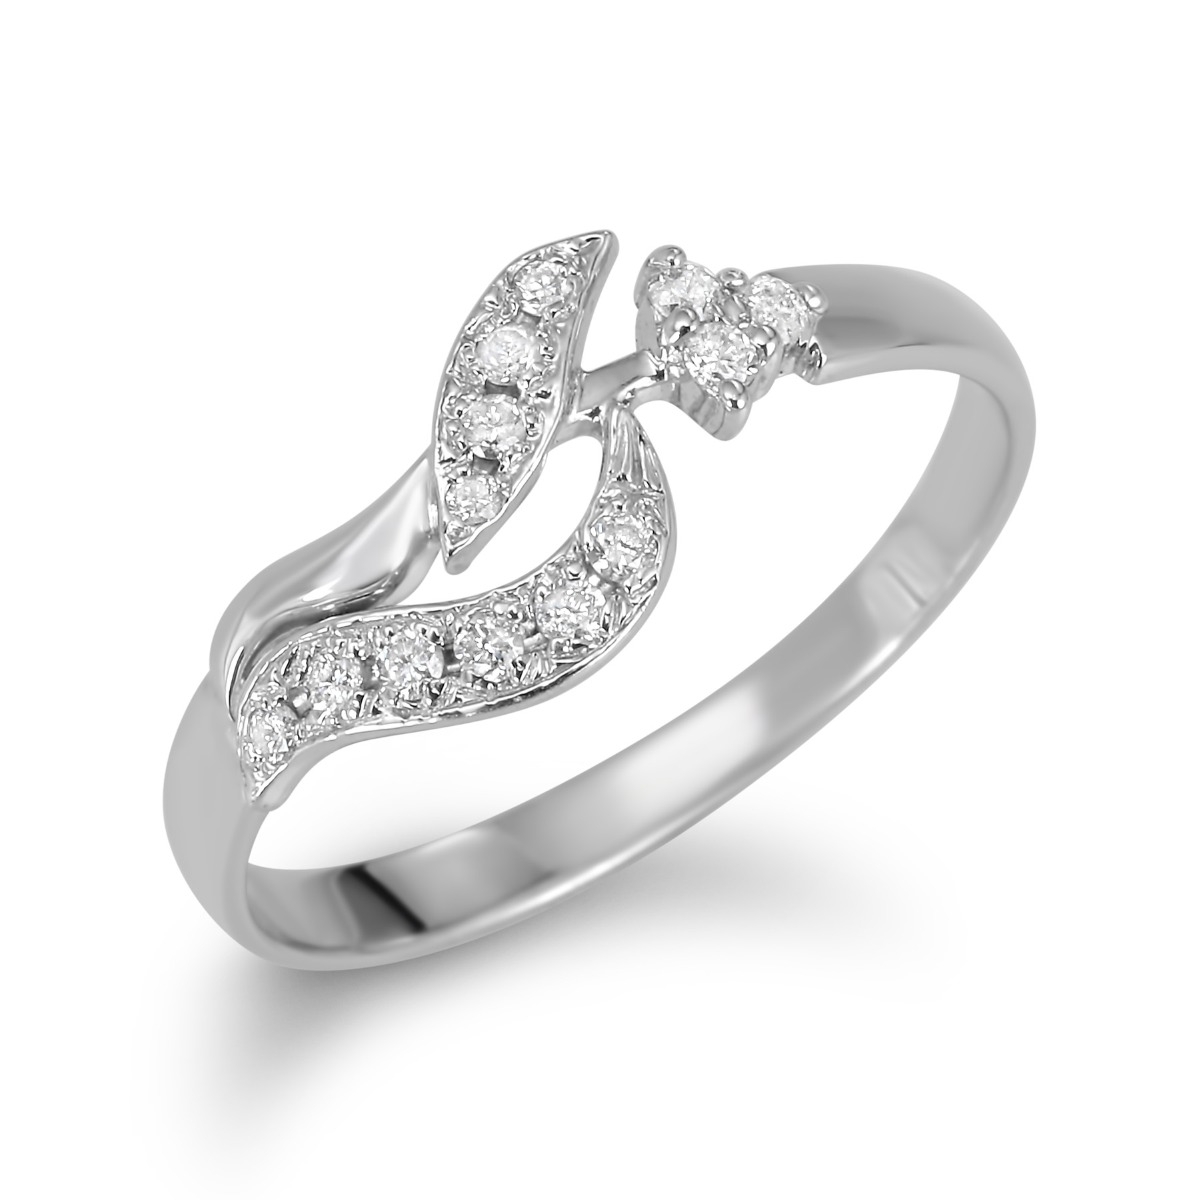 Anbinder 14K White Gold Freeform Floral Ring with Diamond Accents - 1